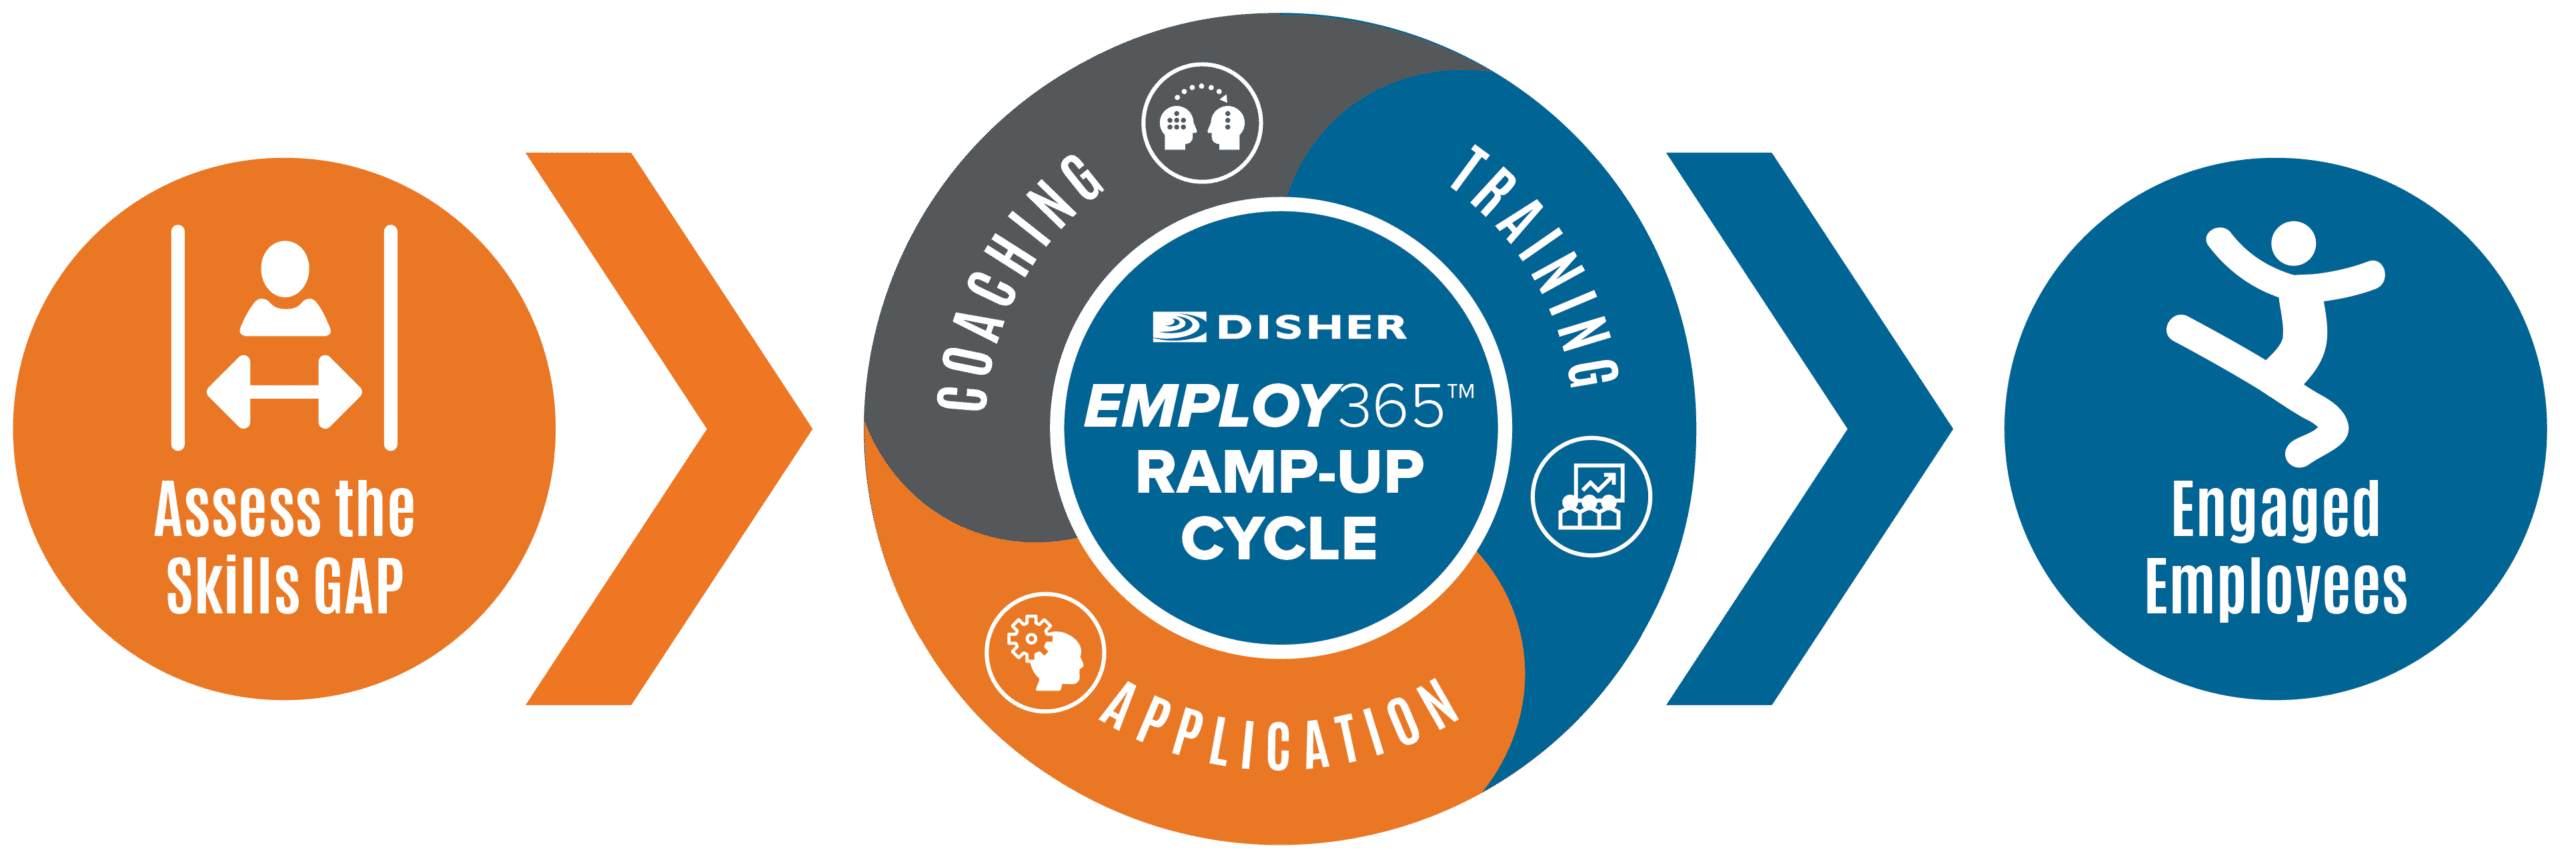 DISHER's Employ 365 Approach Graphic